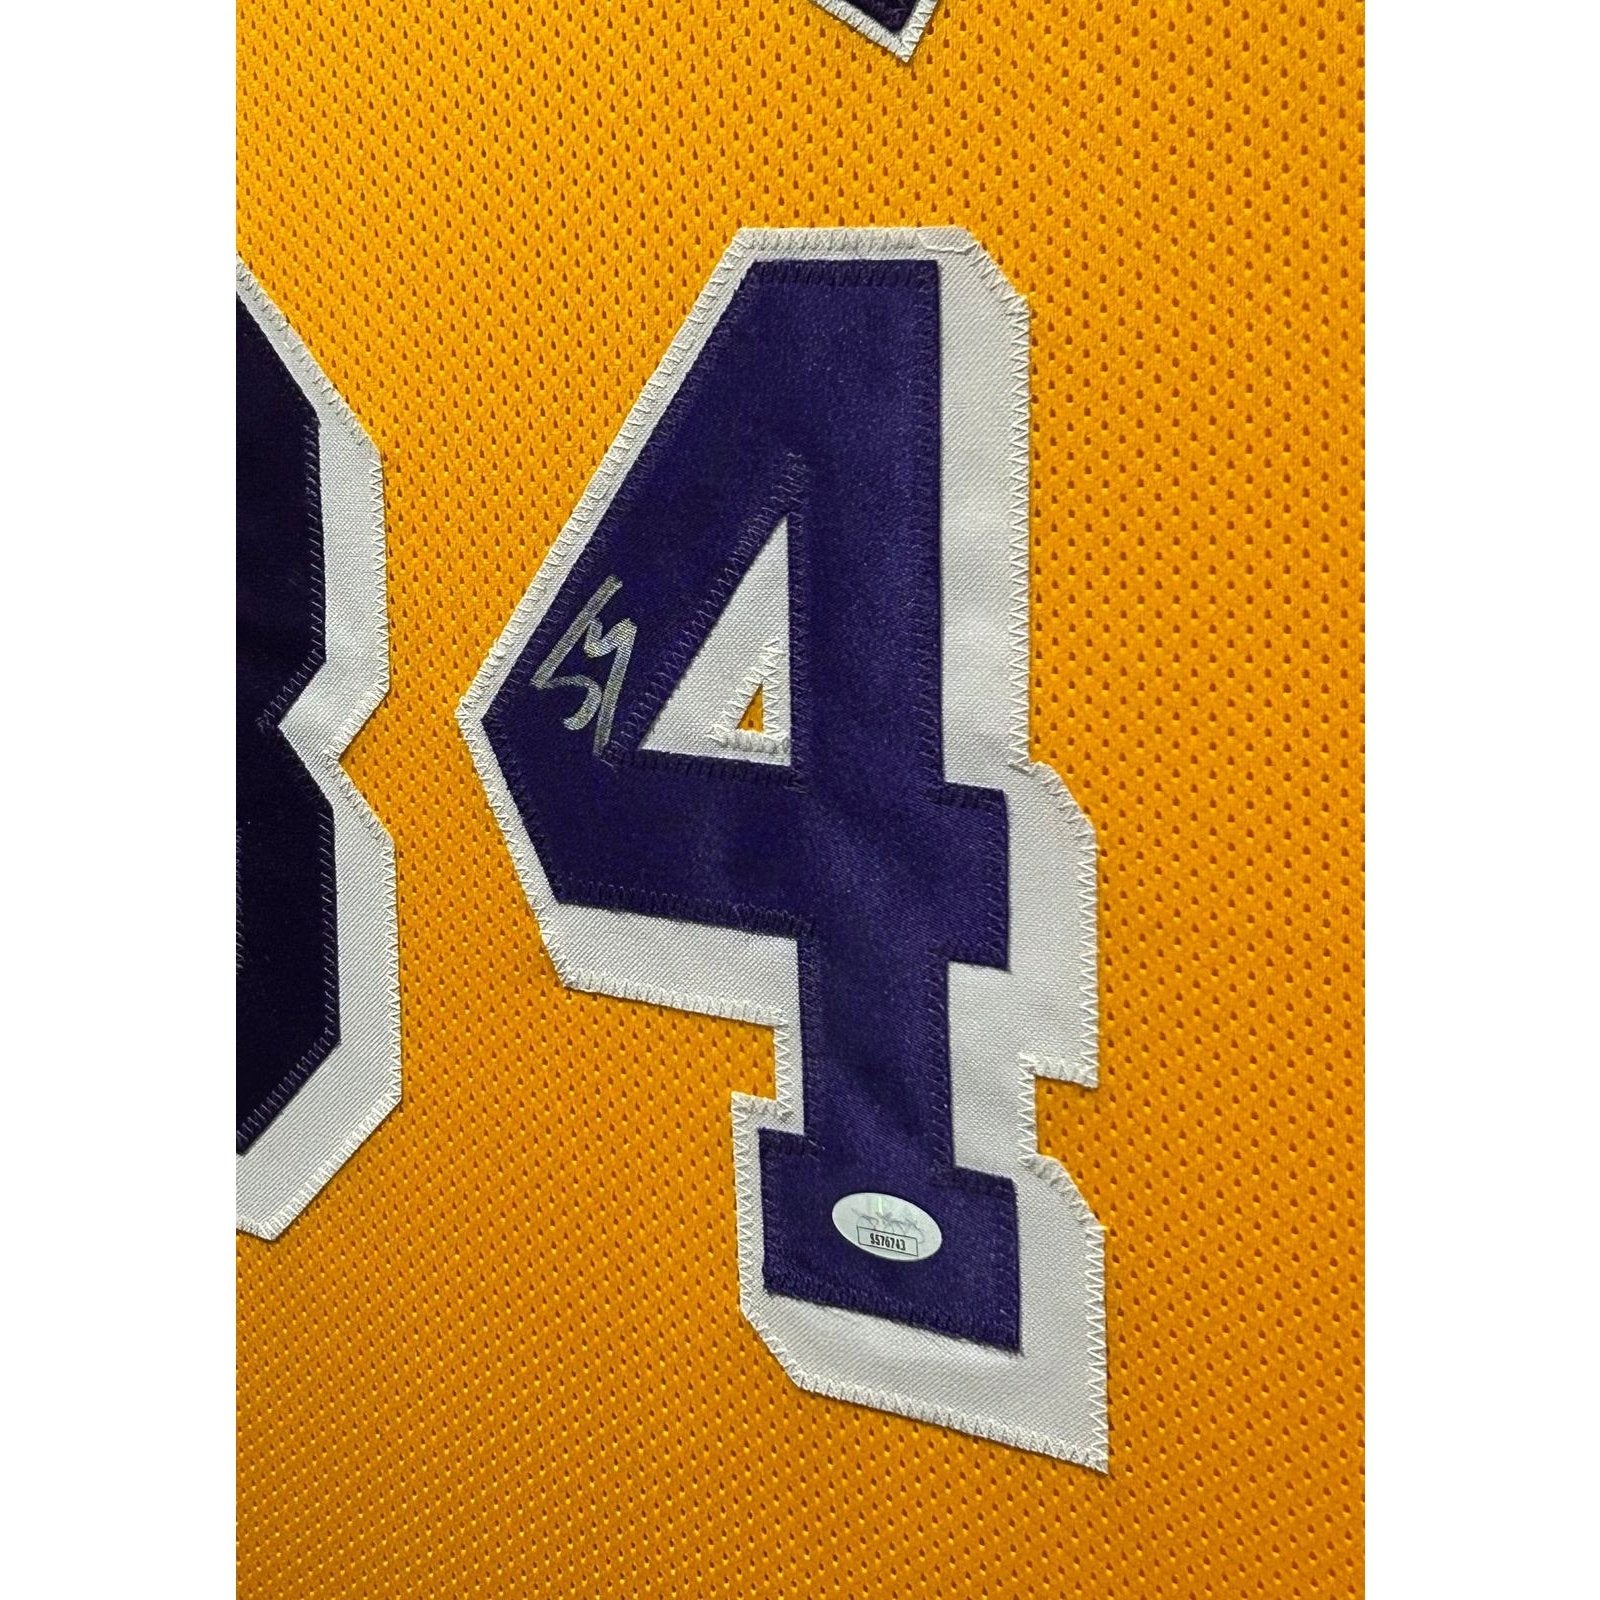 Bleachers Sports Music & Framing — Shaquille O'Neal Signed Los Angeles  Lakers Jersey - JSA COA Authenticated - Professionally Framed